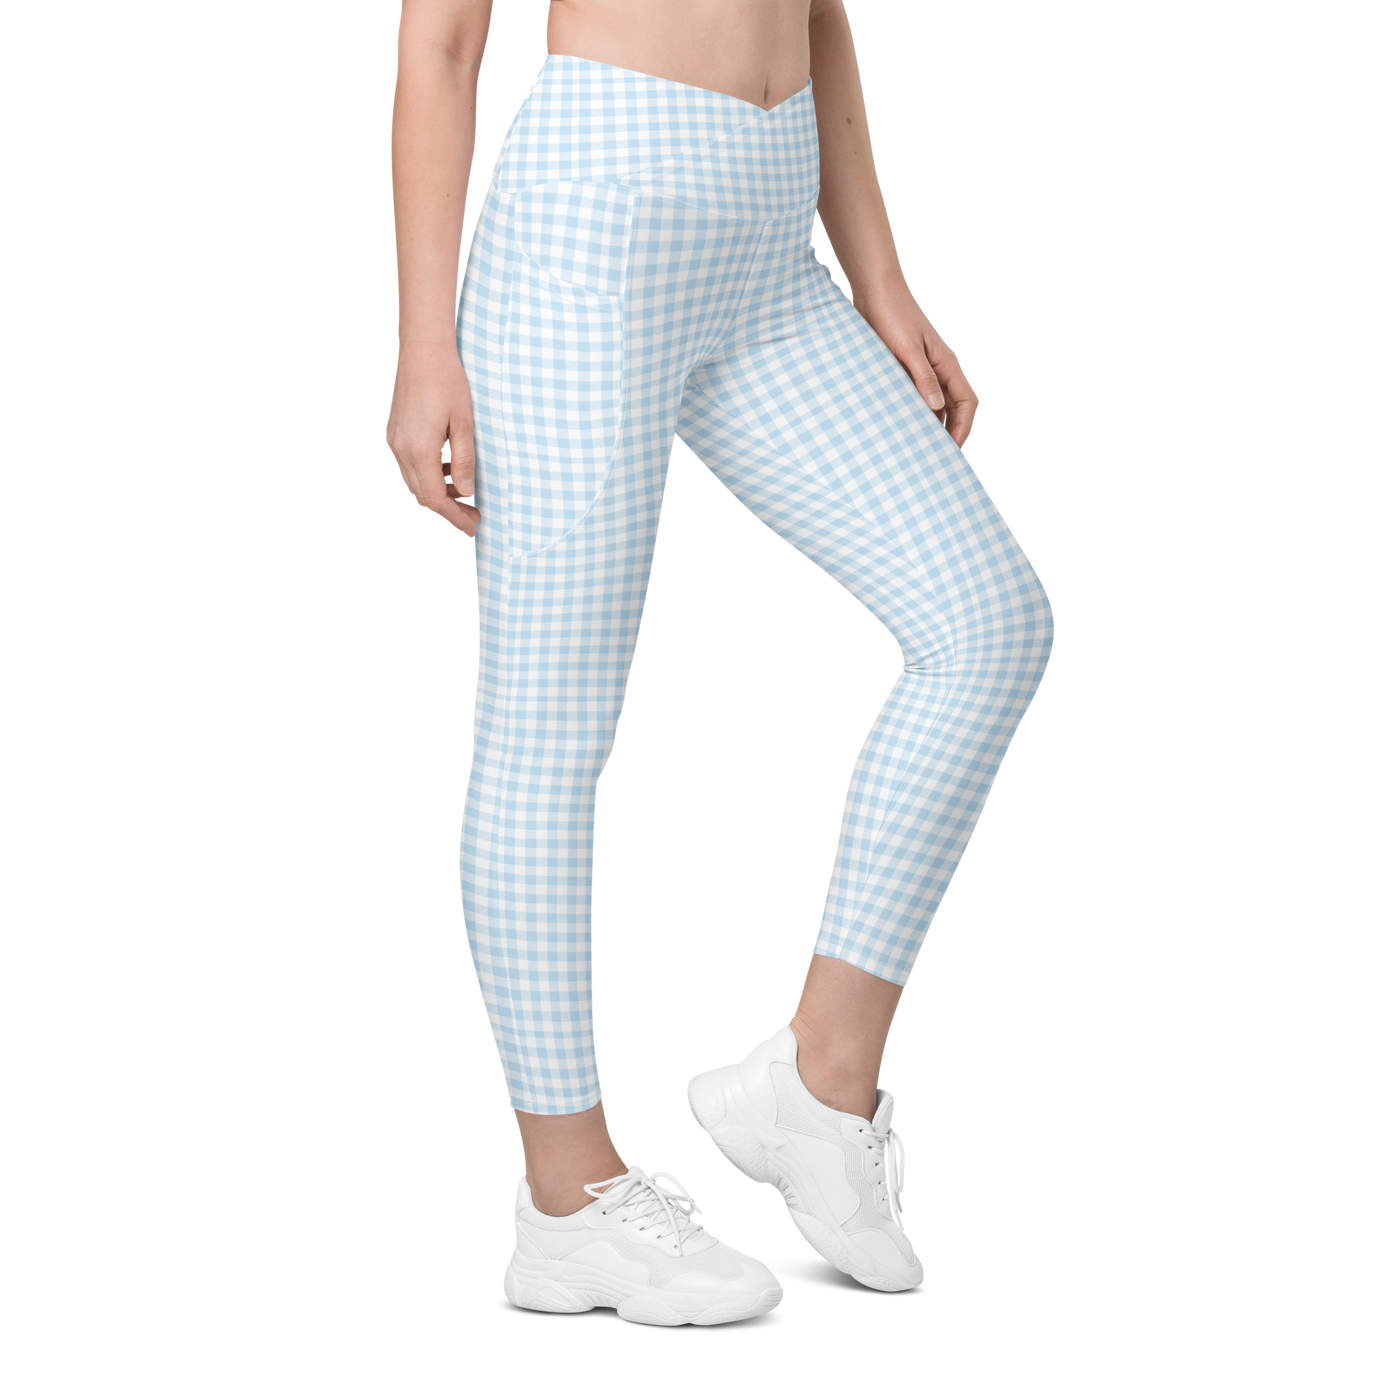 'Blue Gingham' Crossover Leggings with pockets